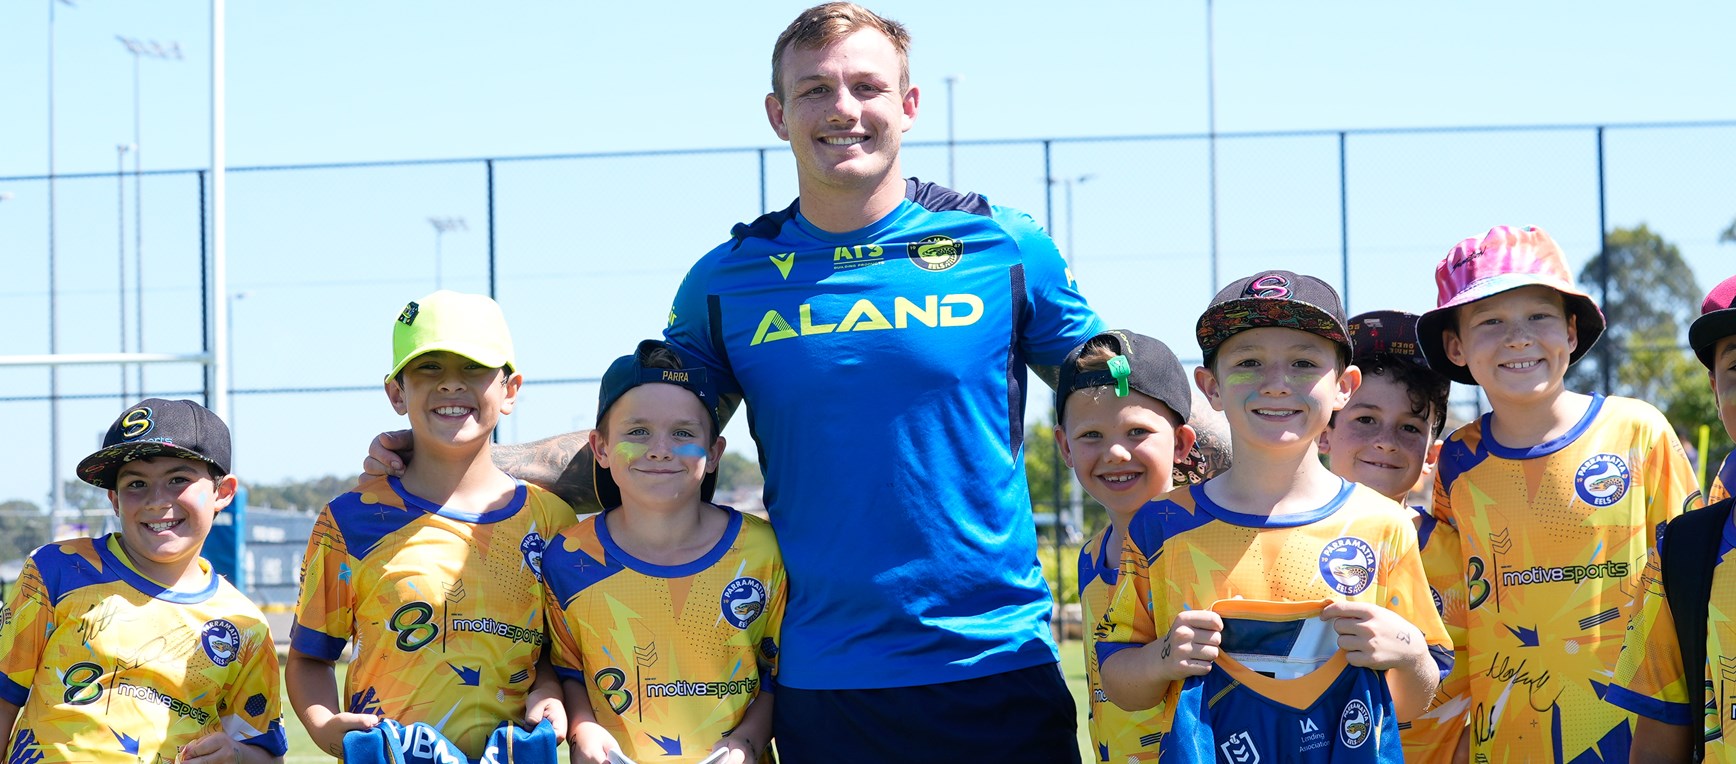 In pictures: Eels x Motiv8sports holiday camp